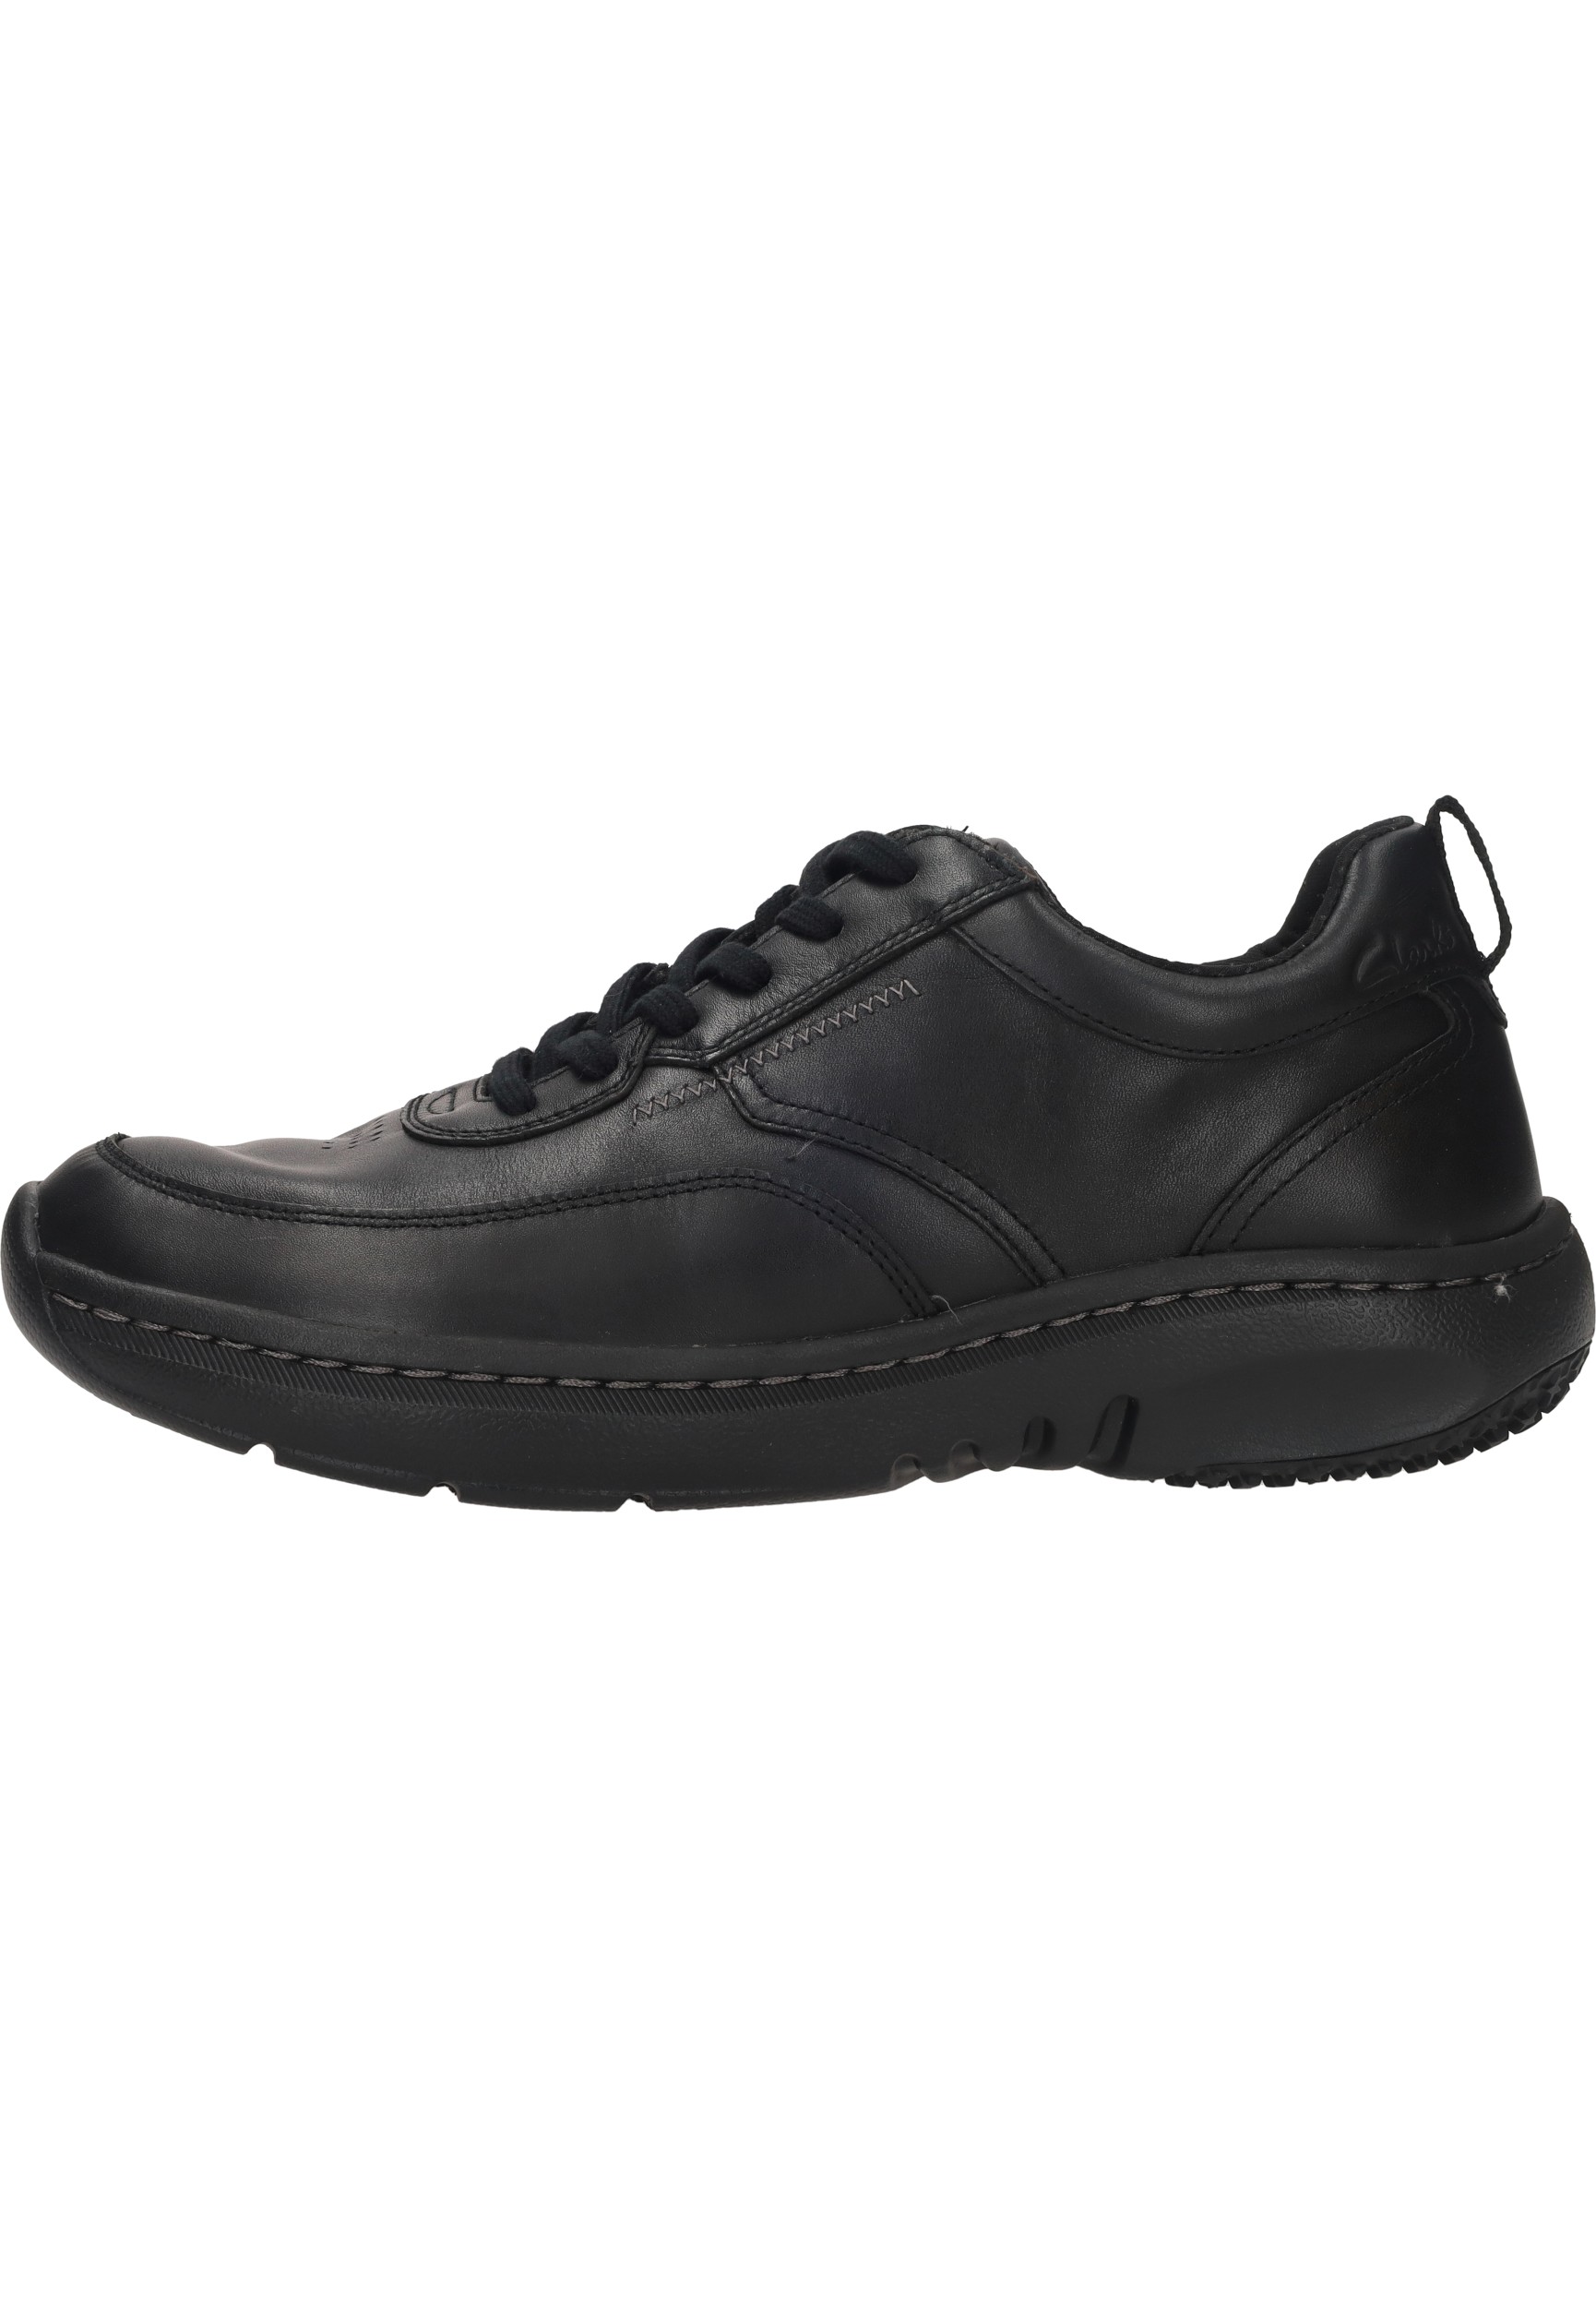 Clarks - Heren - ClarksPro Lace - H - 2 - black leather - maat 7